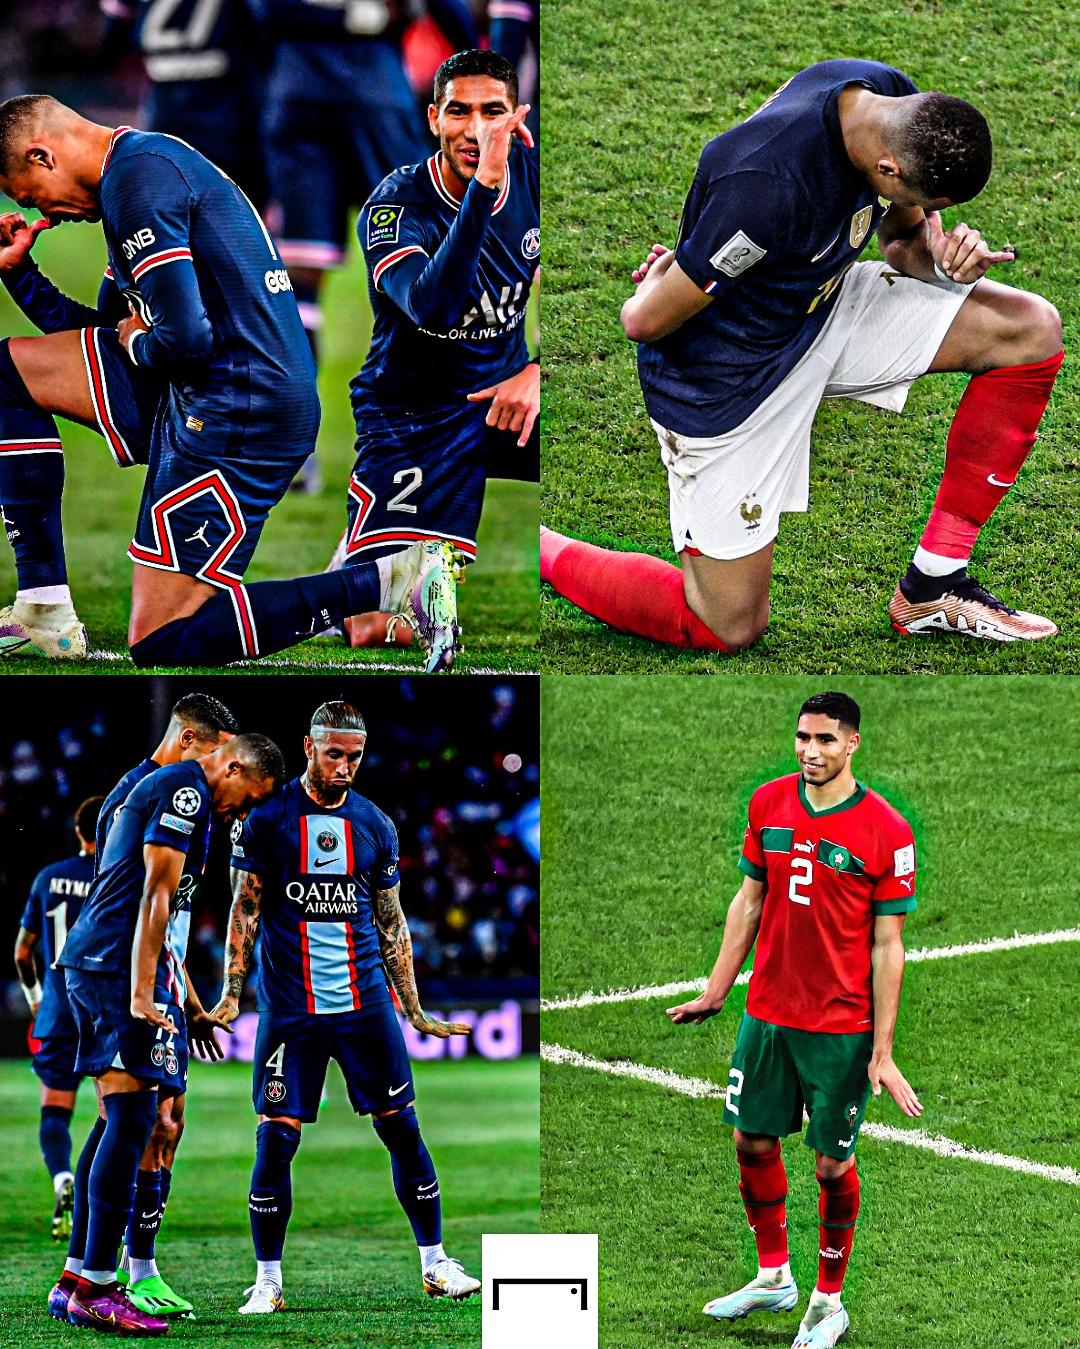 Free Download Goal Kylian Mbappe And Achraf Hakimi Have The Best Friendship 1080x1350 For Your